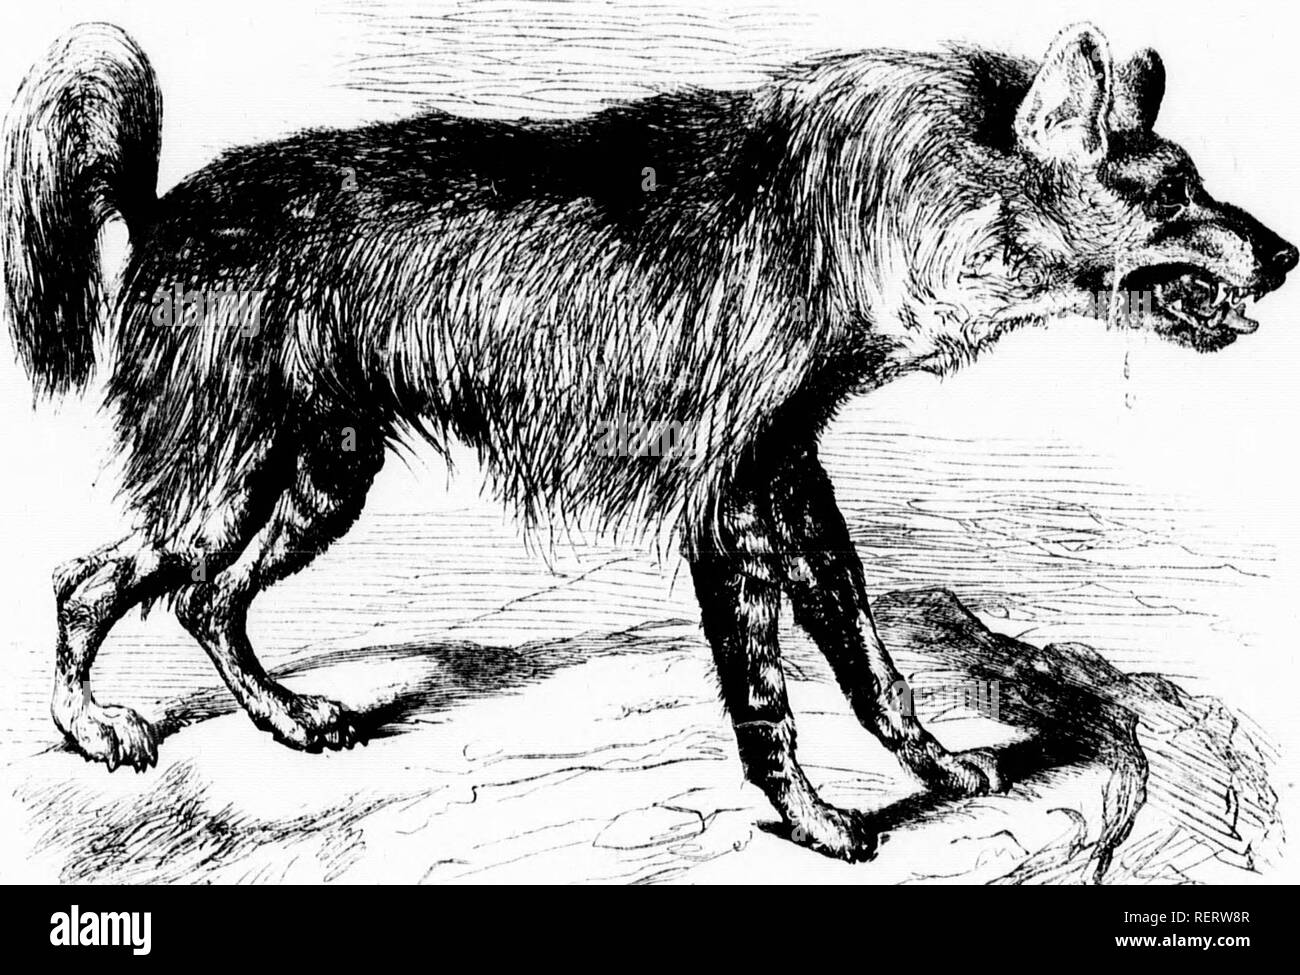 . The illustrated natural history [microform]. Mammals; Natural history; MammifÃ¨res; Sciences naturelles. '' &quot;^^t-â ^â -^Hi^-i^^^^^'l..^ nii'.iWN iiv.i;.A.âcvu'f.. nndihct. v^l tngetl ipr. Tl le paws arc nearly Ijlark. In tlio roll fL'tldll young specimen, whieli, furiously I'nounli. is devnid thereby ])resenting a reniarkalile'cnntrast to the uniuials wjiich we hav tin- Th'itish Museum is a very â ;]M)ts that mark its adult fur, or exami)le, the hon, which in mature age is of a iinihn-m tawiiv hue, is eoveivd young whh spots and striiies, Mhich seem to iiart 1 .1 rni . .- . ' e ali'cad Stock Photo